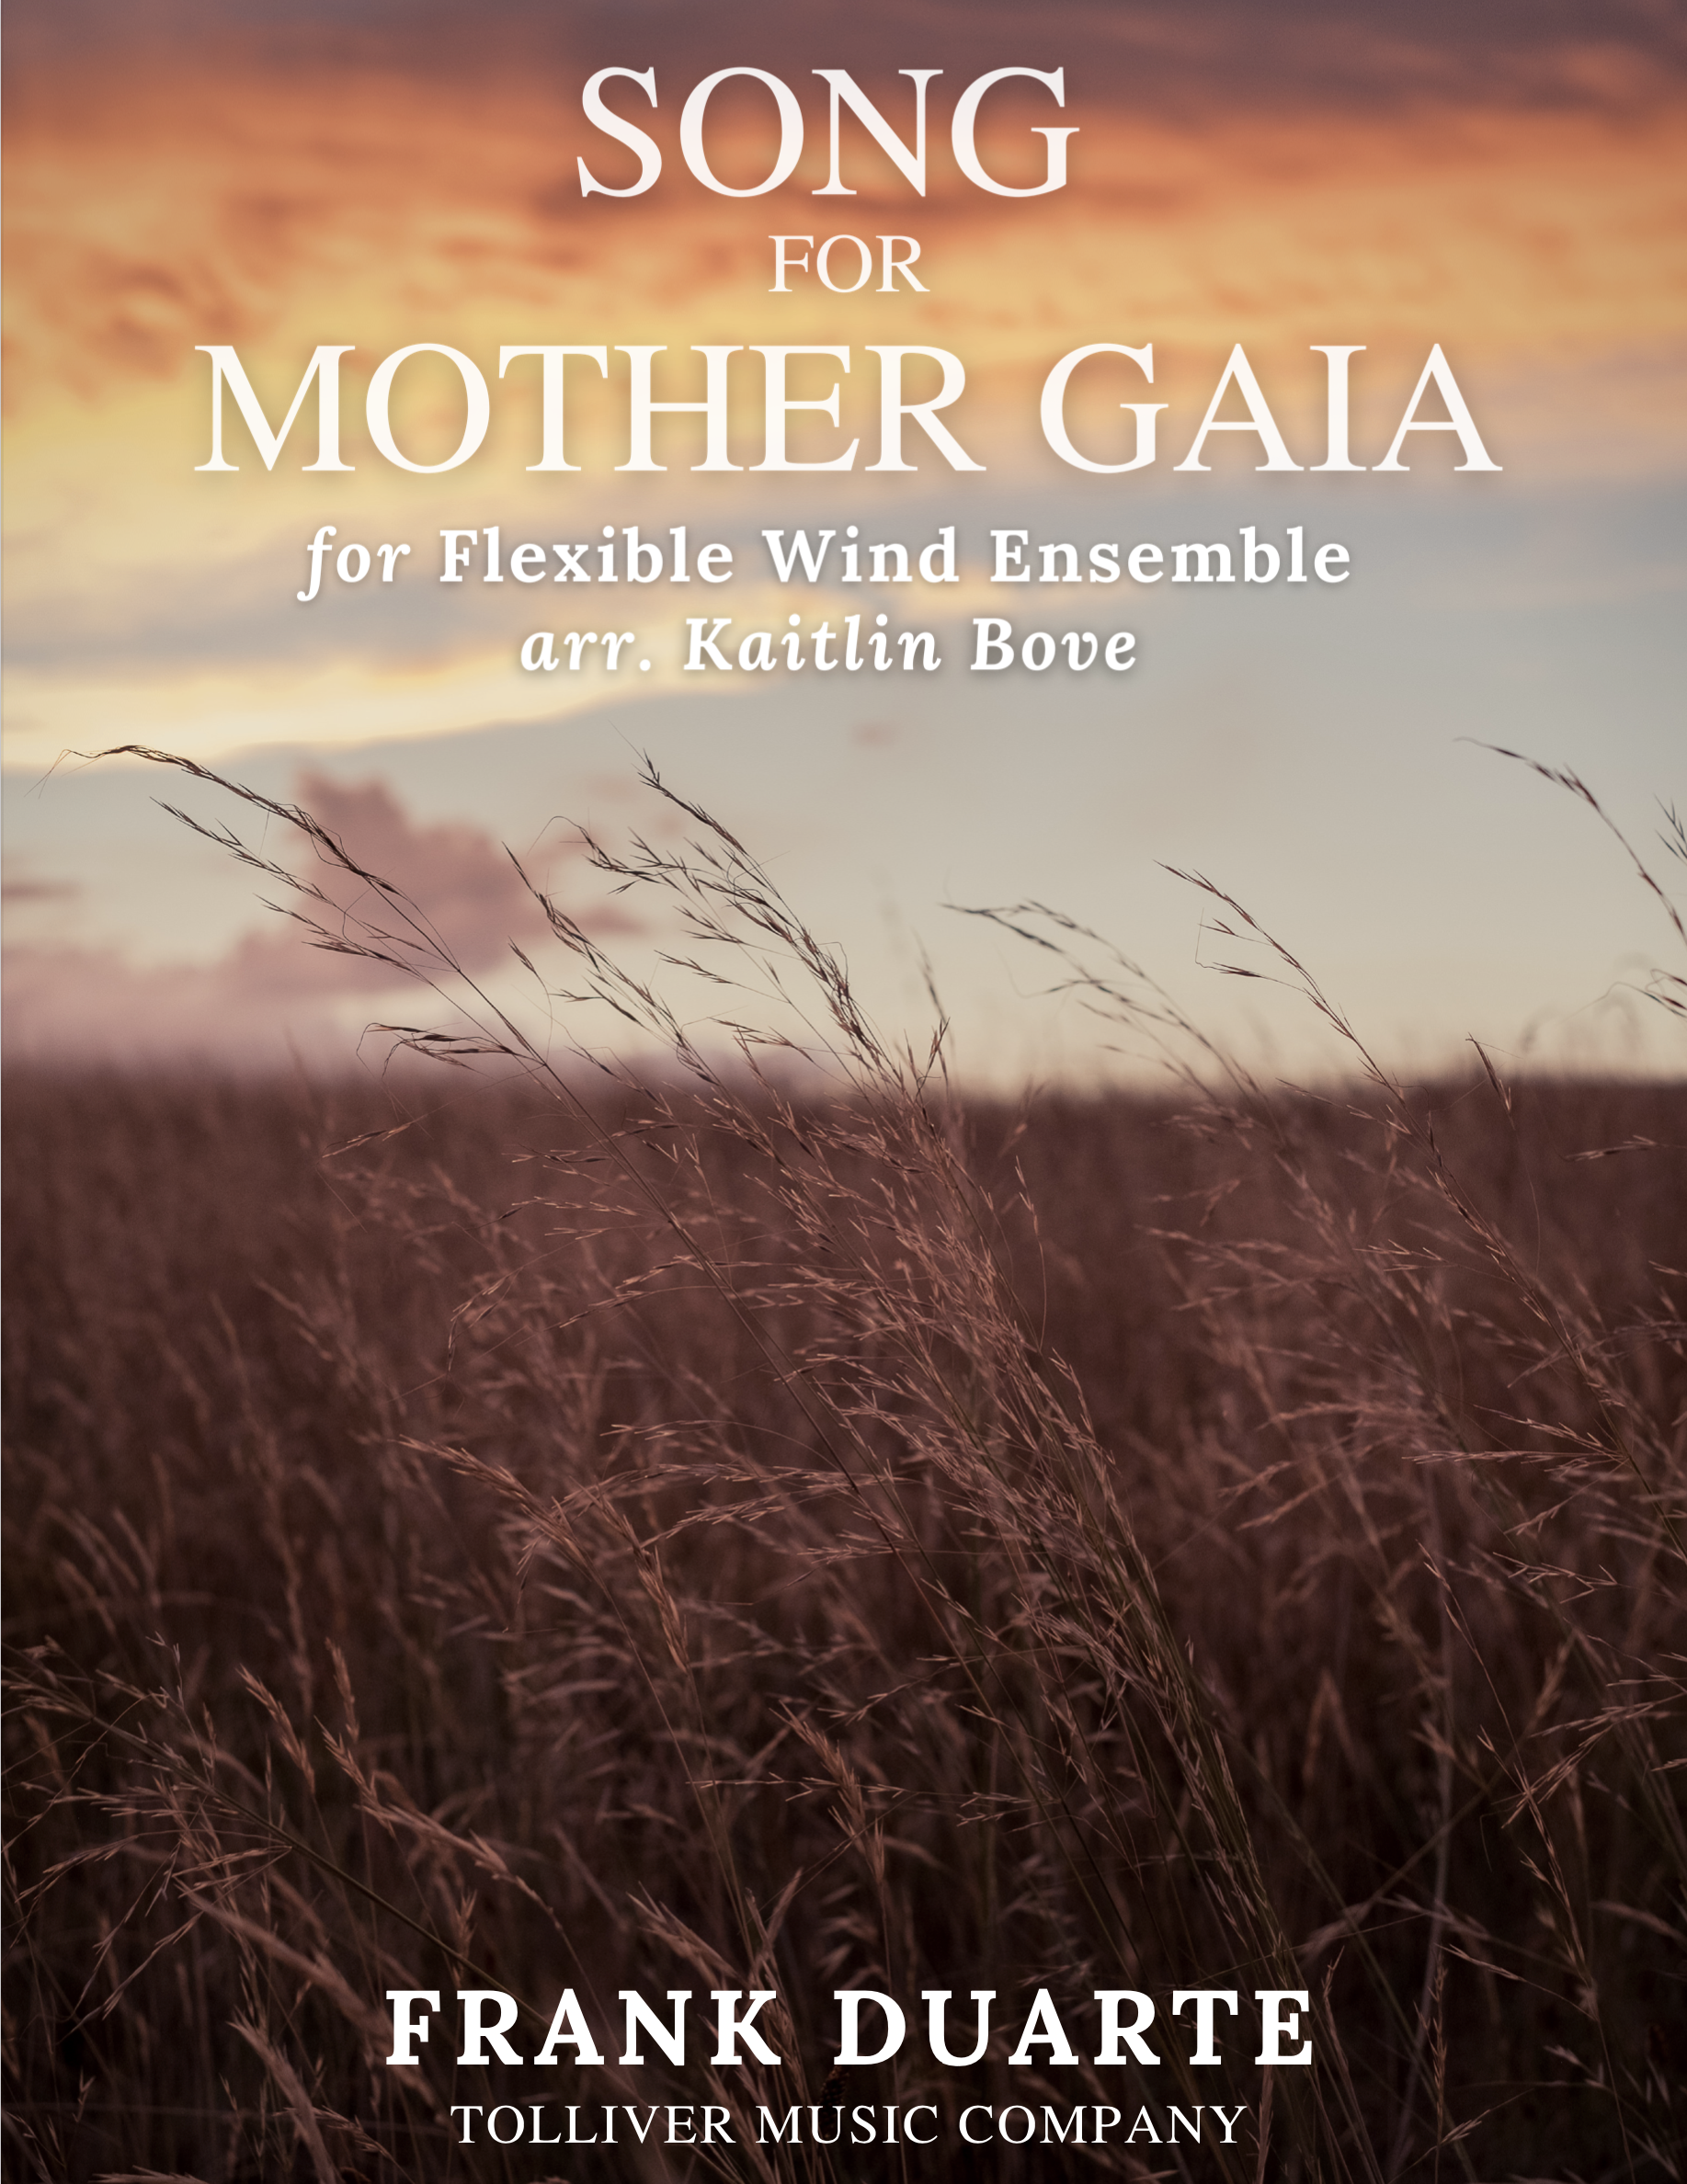 Song For Mother Gaia by Frank Duarte arr. Bove